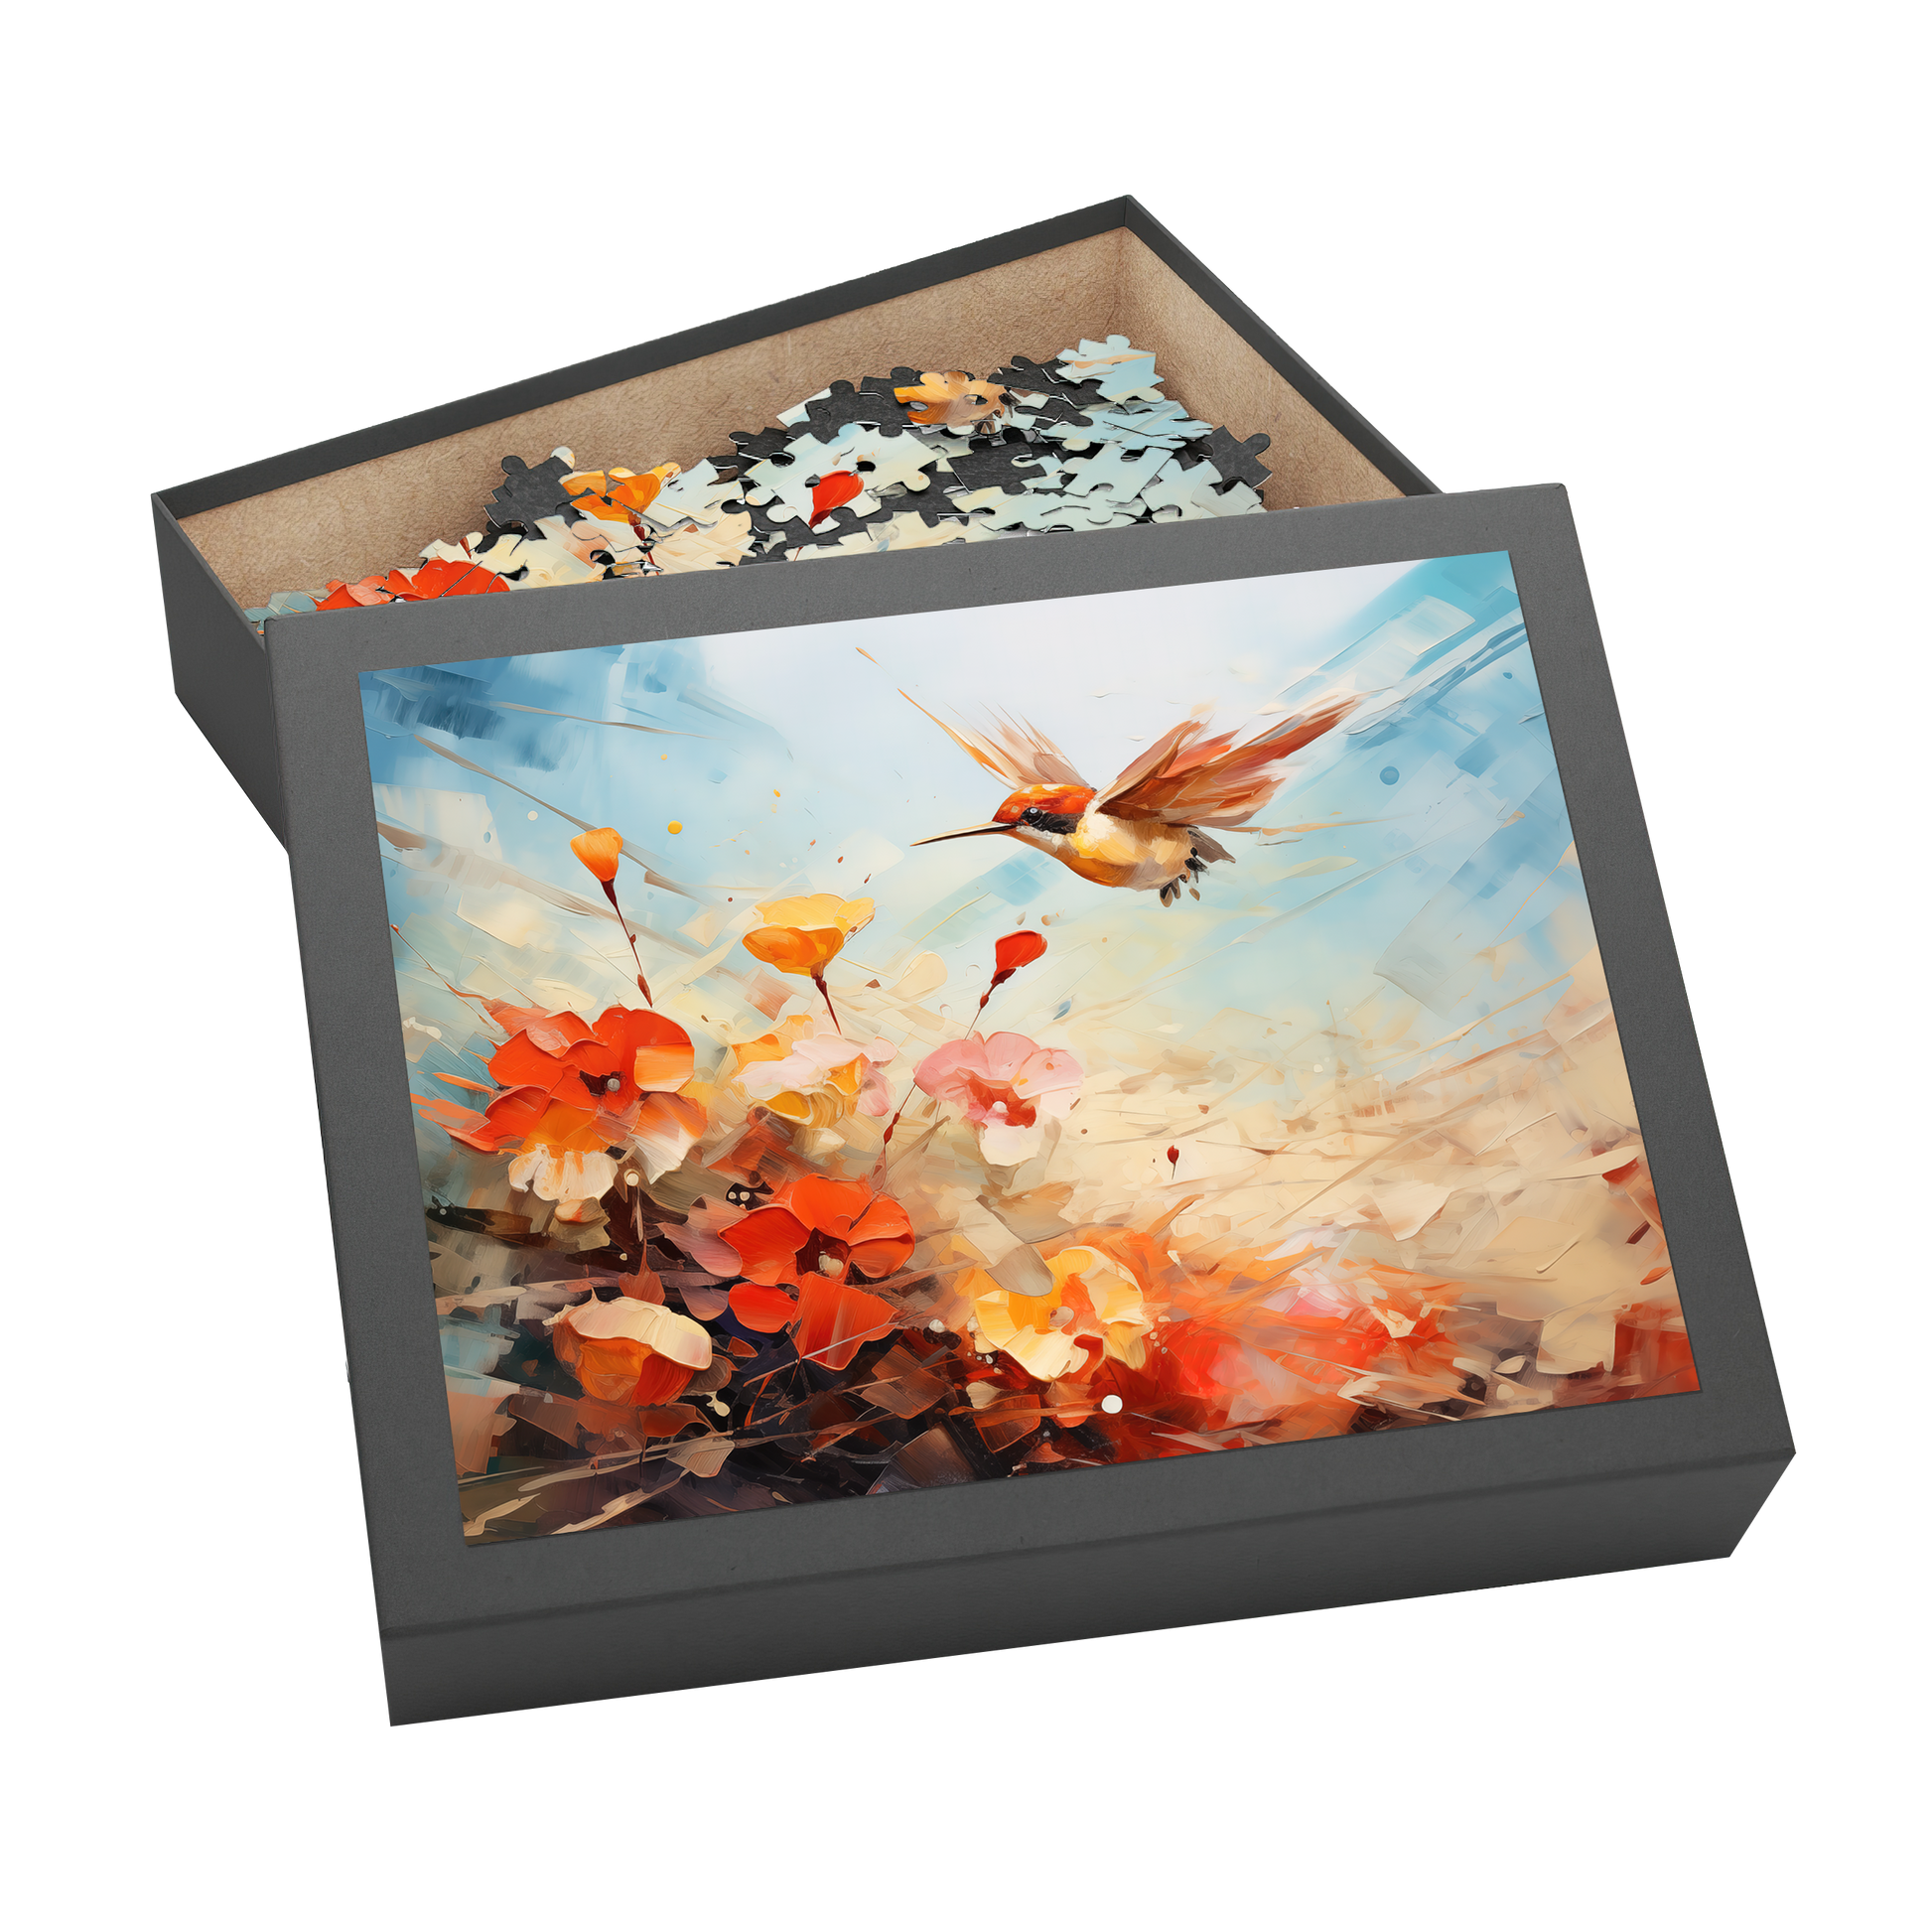 Hummingbird - Premium Jigsaw Puzzle - Delicate, Colorful, Floral, Vibrant - Multiple Sizes Available